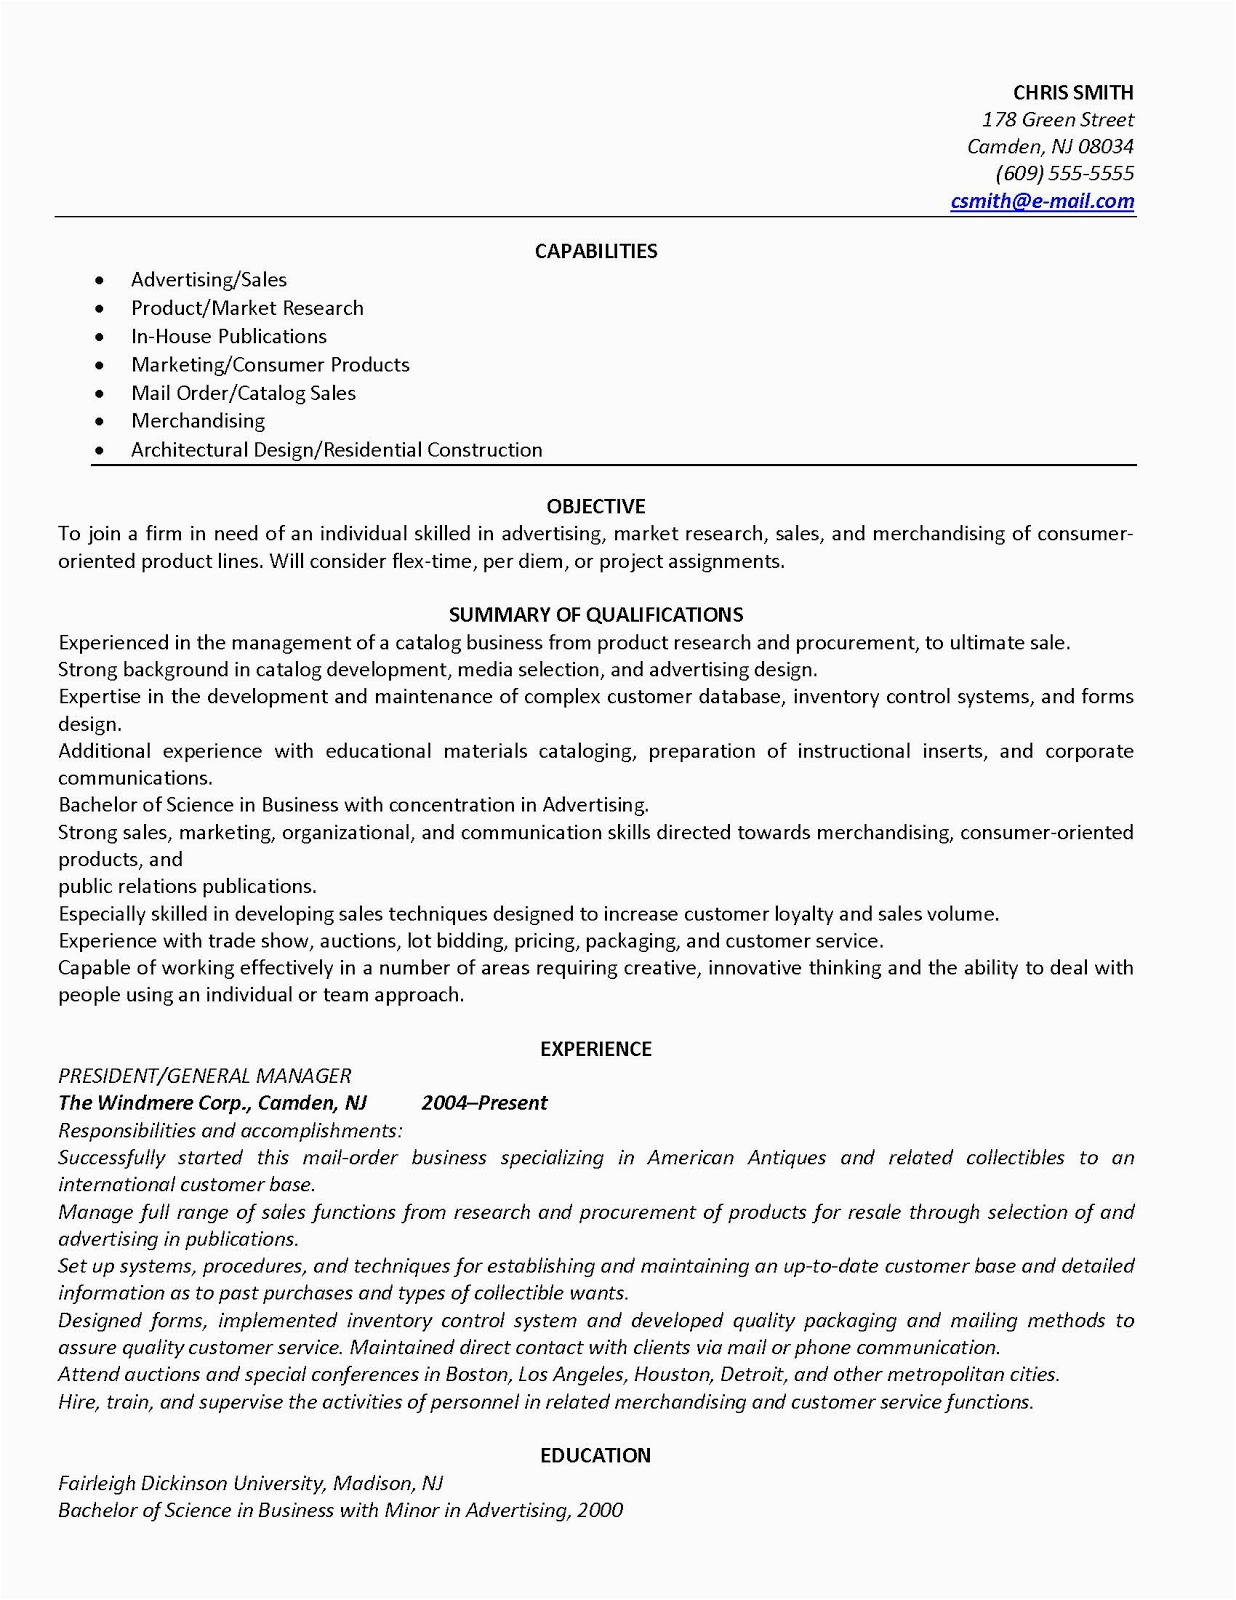 Example Of A Functional Resume Sample Best Functional Resumes for 2012